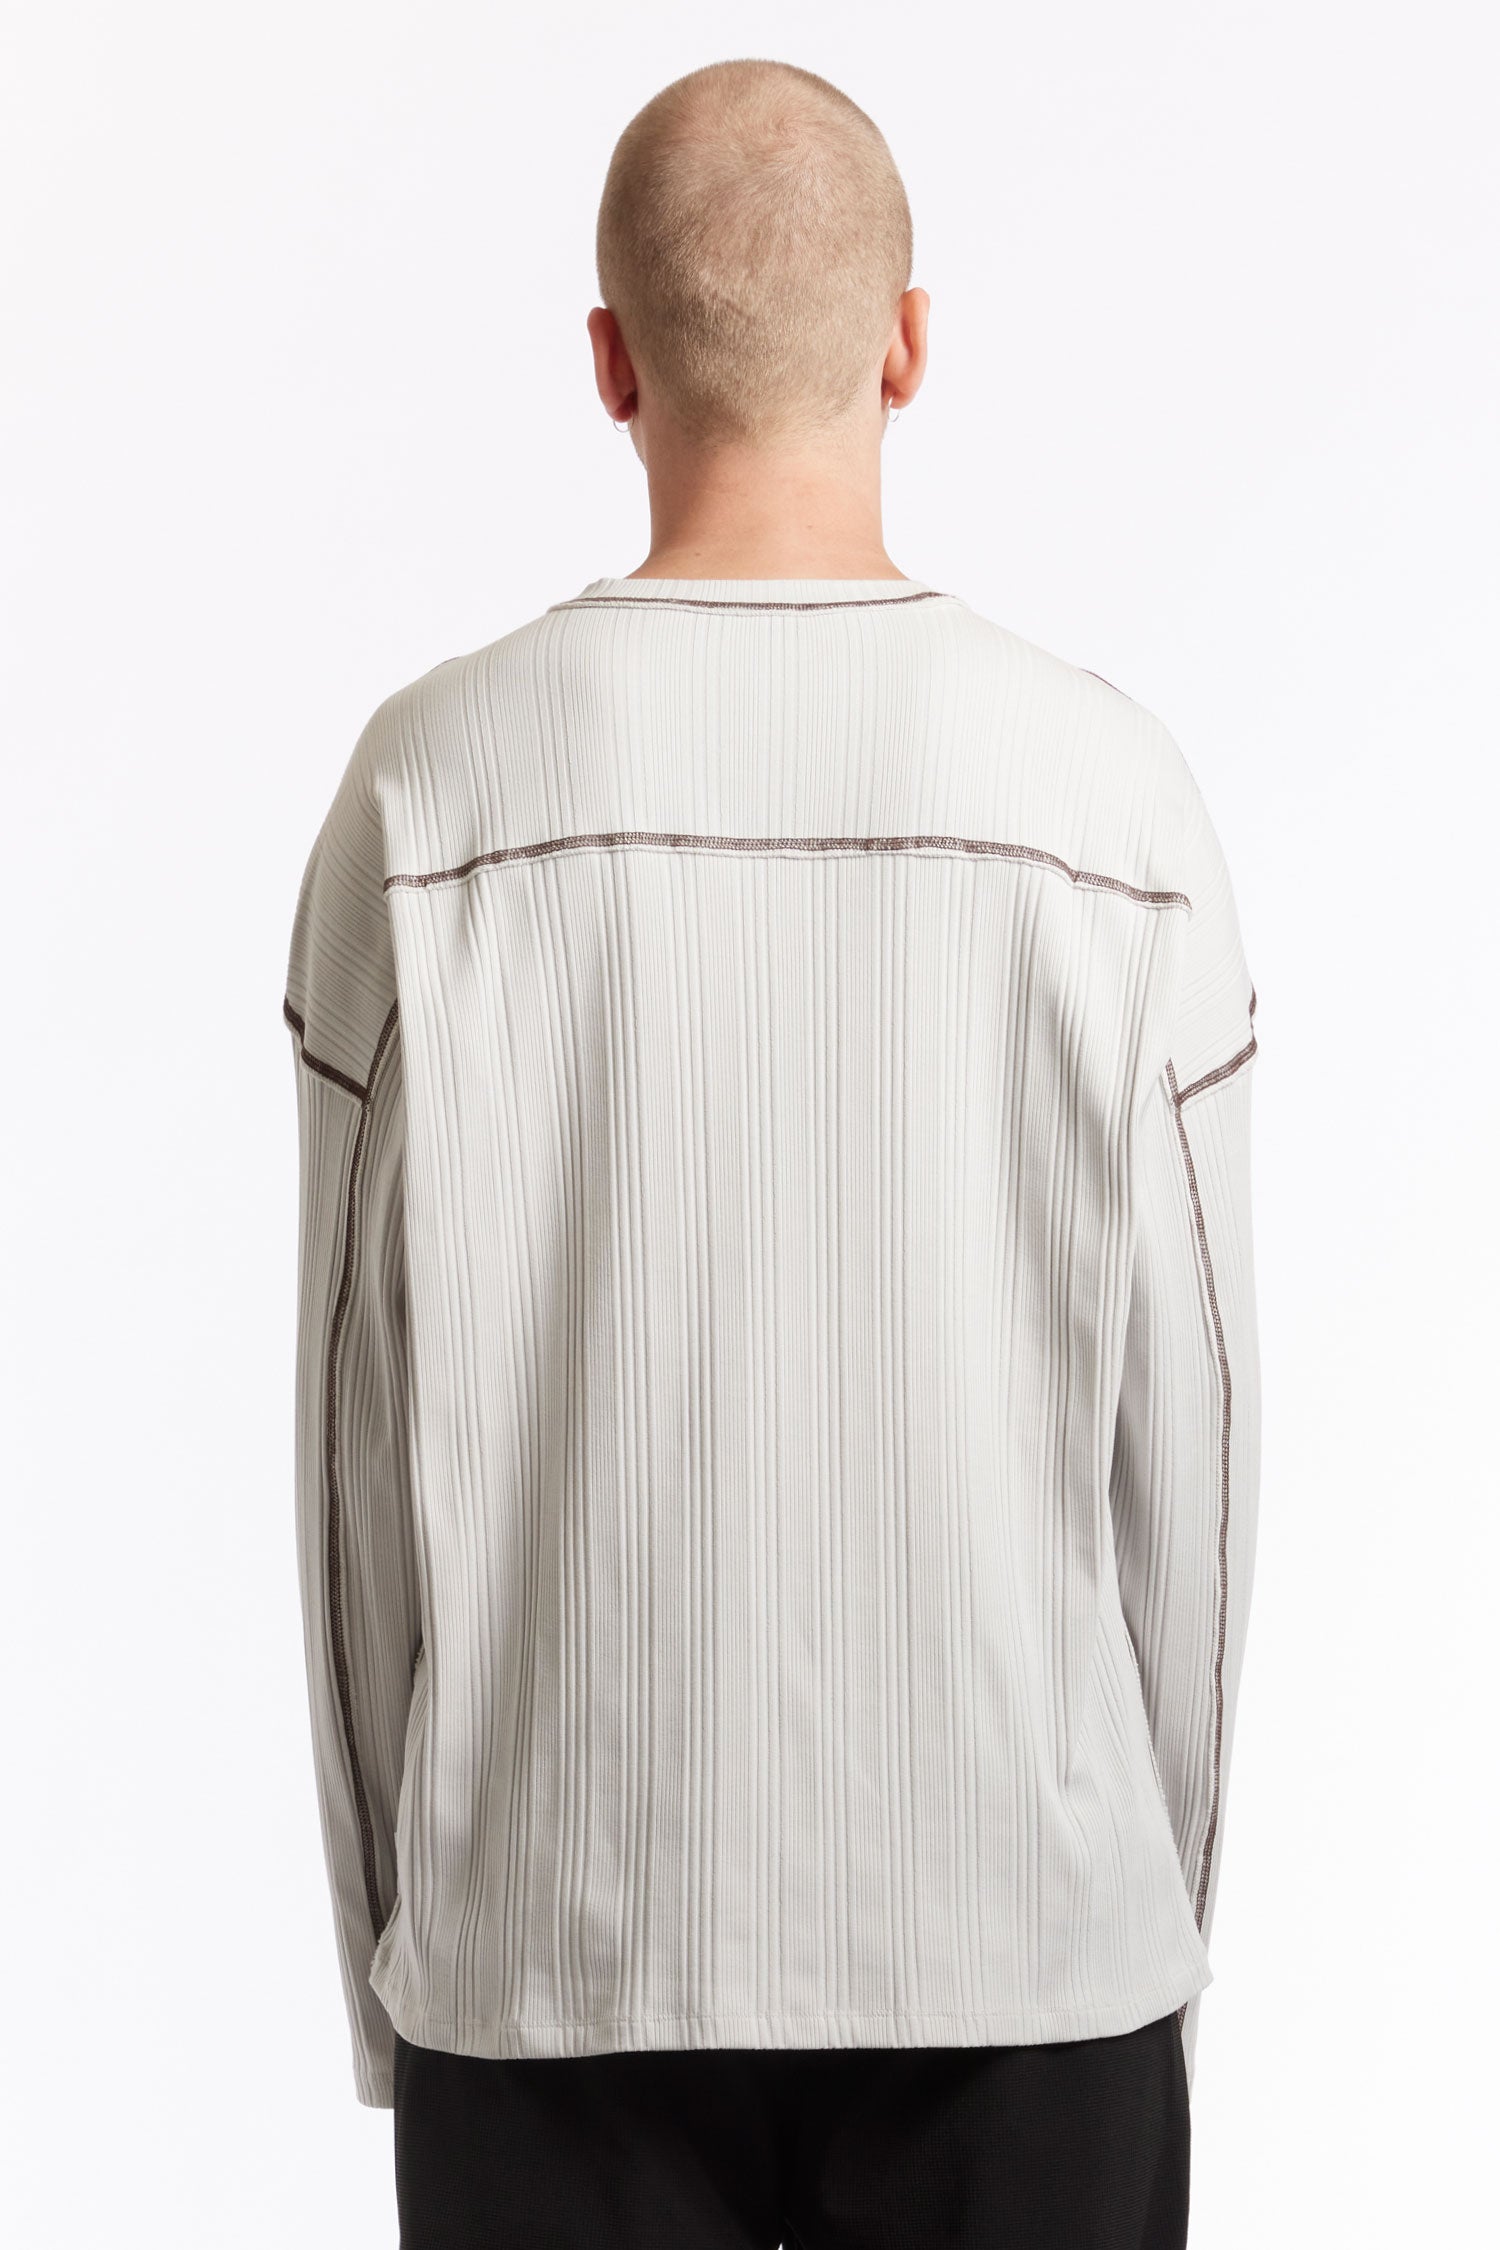 The AFFXWRKS - BOXED PULLOVER RIB  available online with global shipping, and in PAM Stores Melbourne and Sydney.